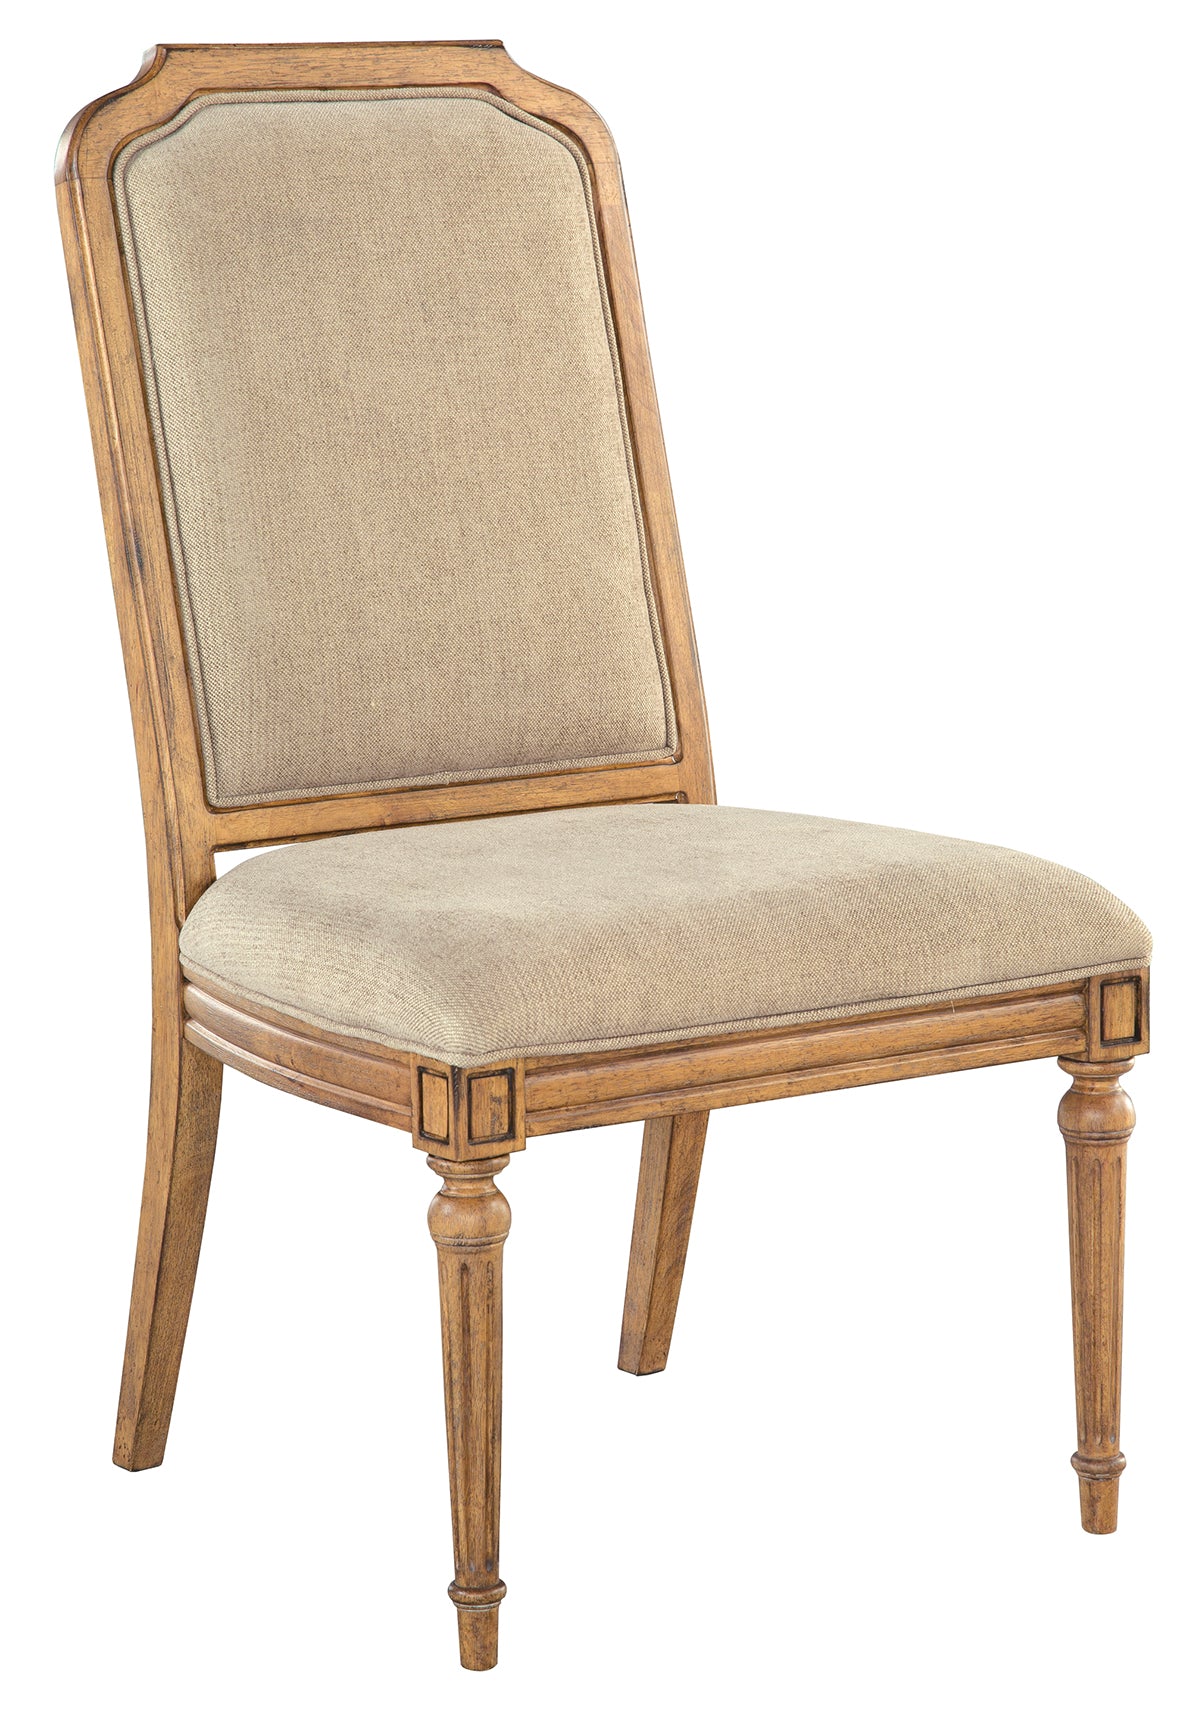 Hekman 23325 Wellington Hall 22in. x 25in. x 42in. Upholstered Dining Side Chair